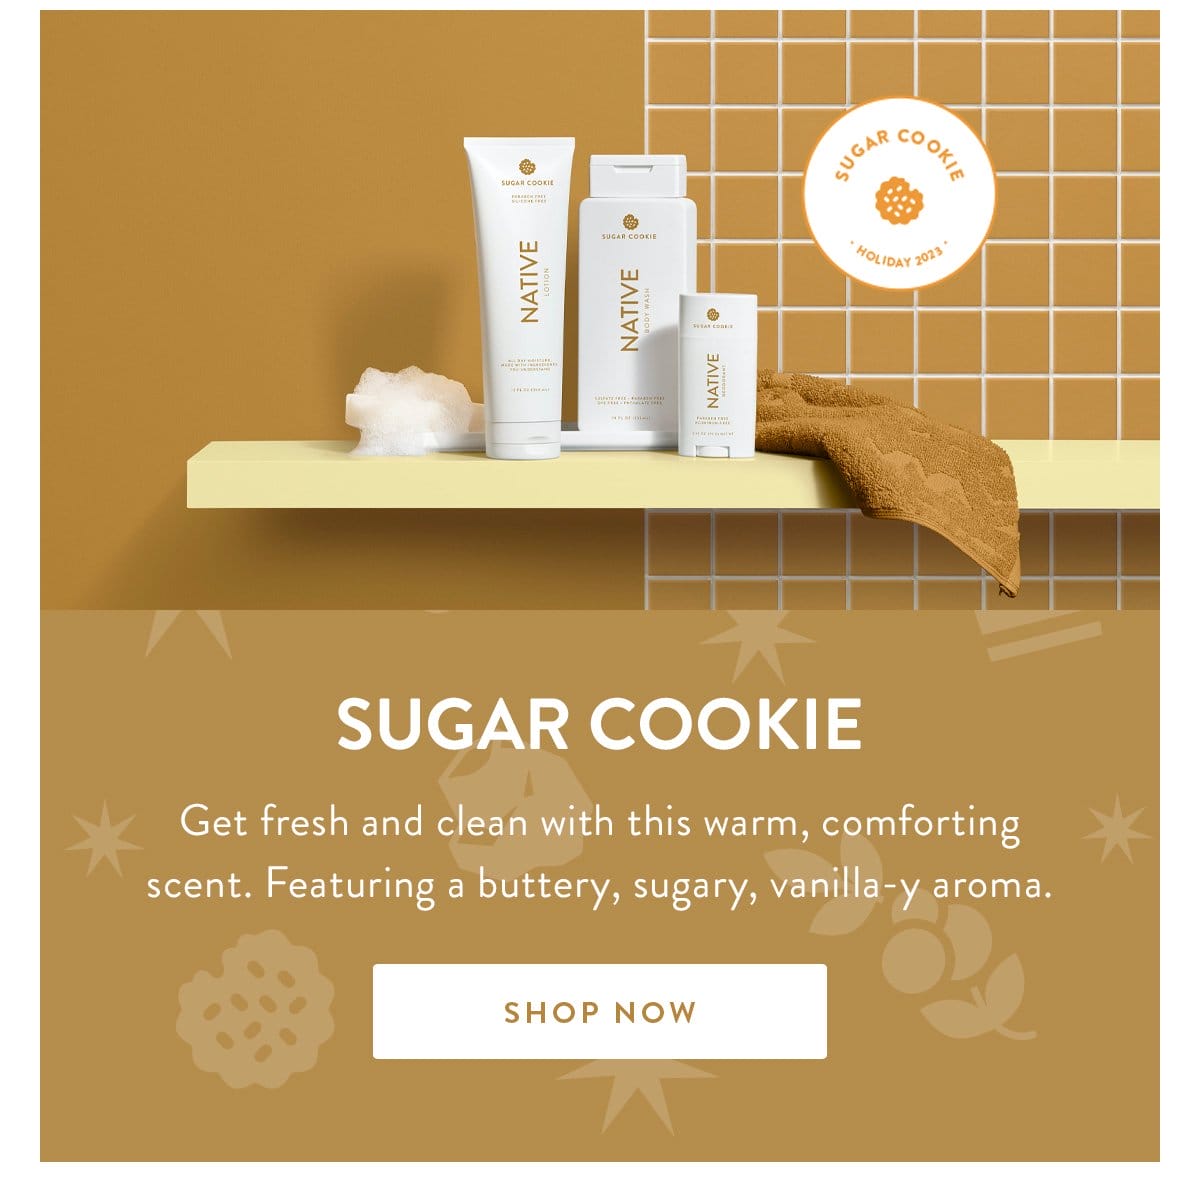 Sugar Cookie | Get fresh and clean with this warm, comforting scent. Featuring a buttery, sugary, vanilla-y aroma. | SHOP NOW